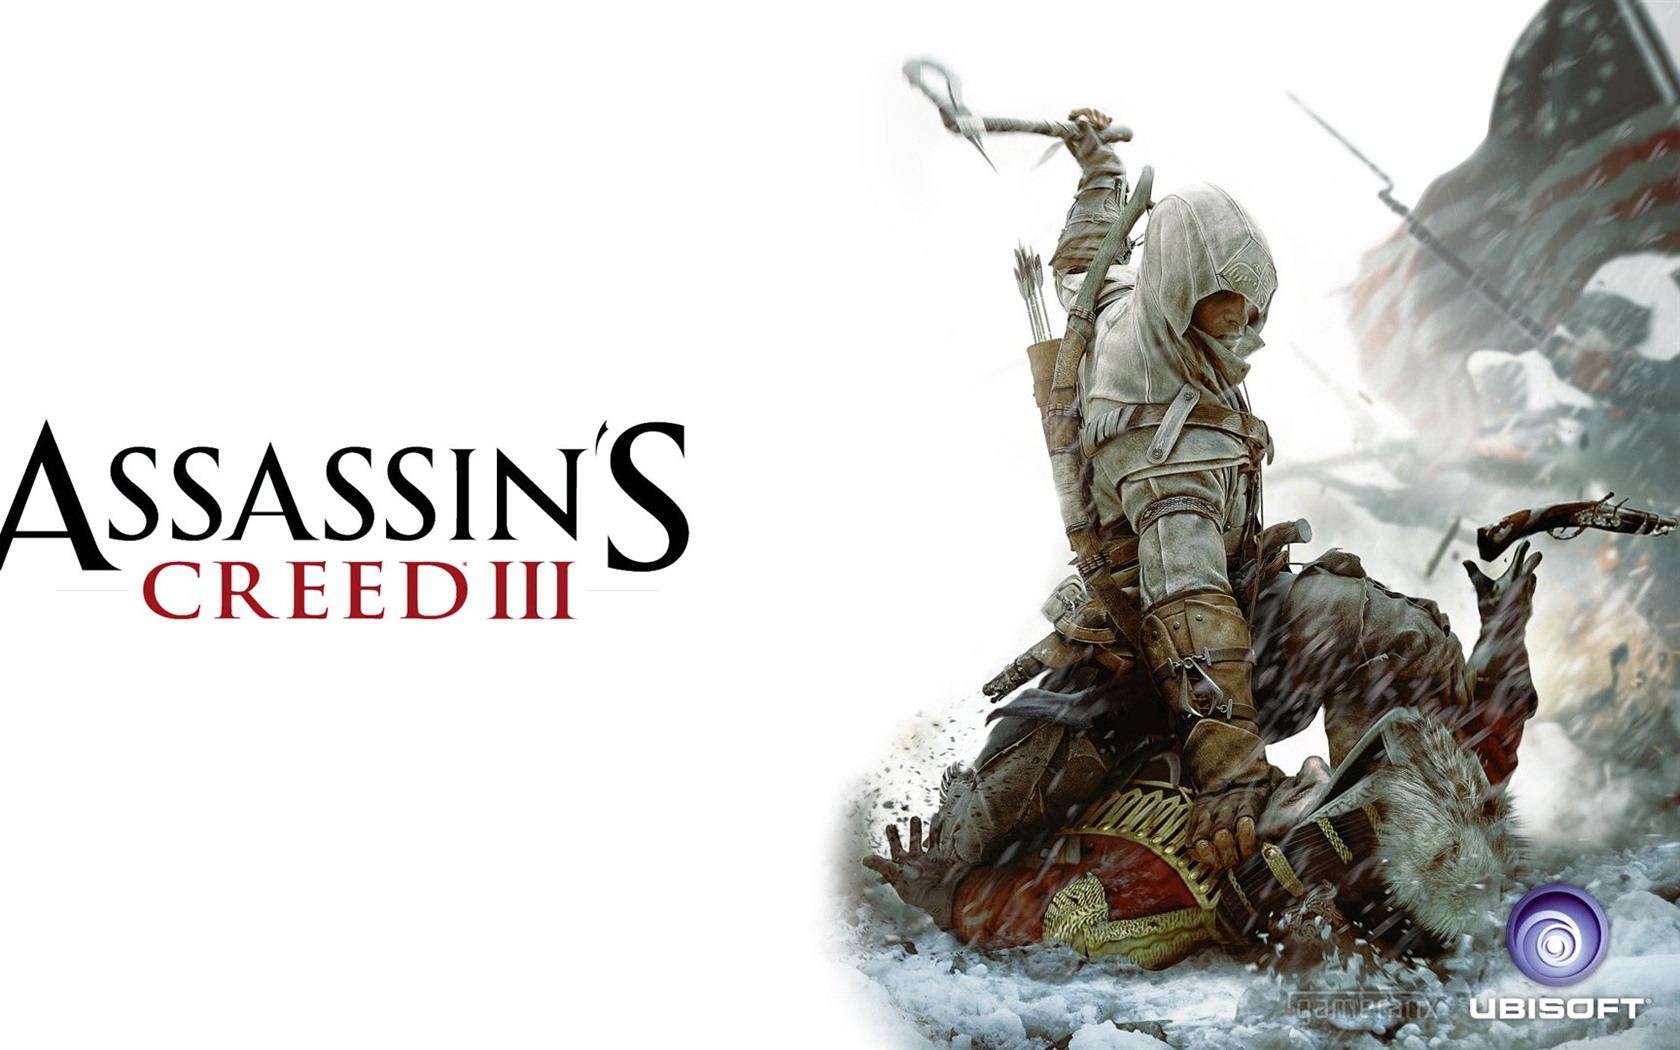 Assassin's Creed 3 HD wallpapers #13 - 1680x1050